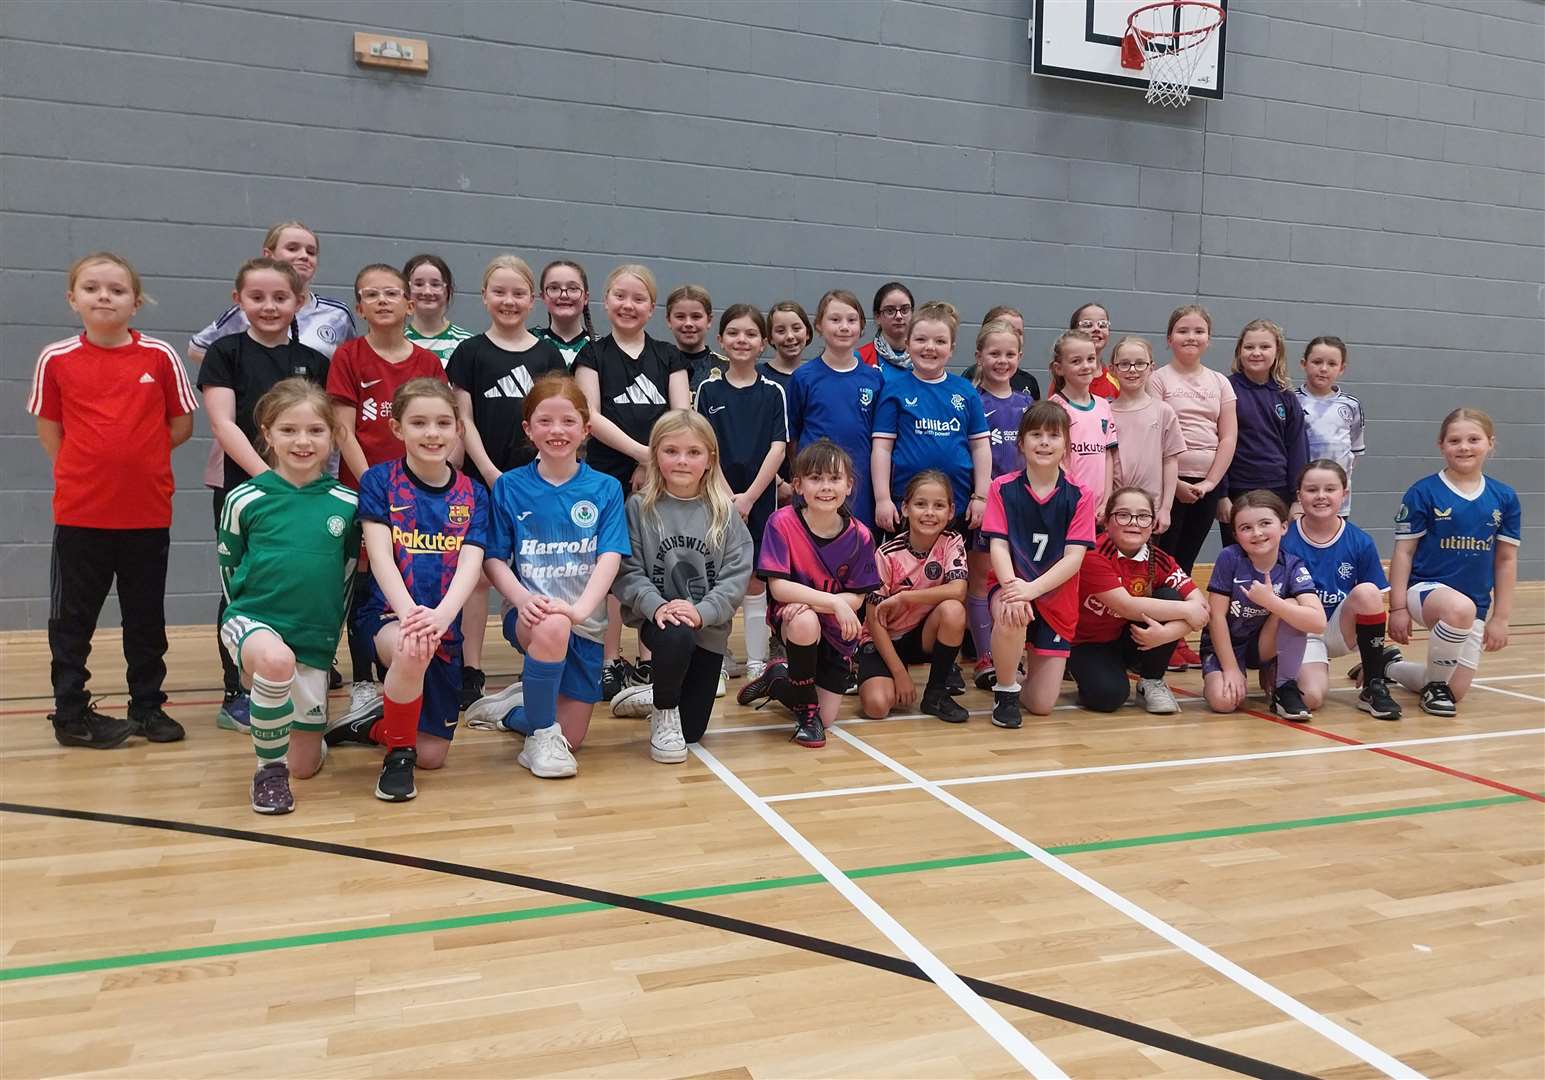 The under-12 age group at this week's girls-only session.